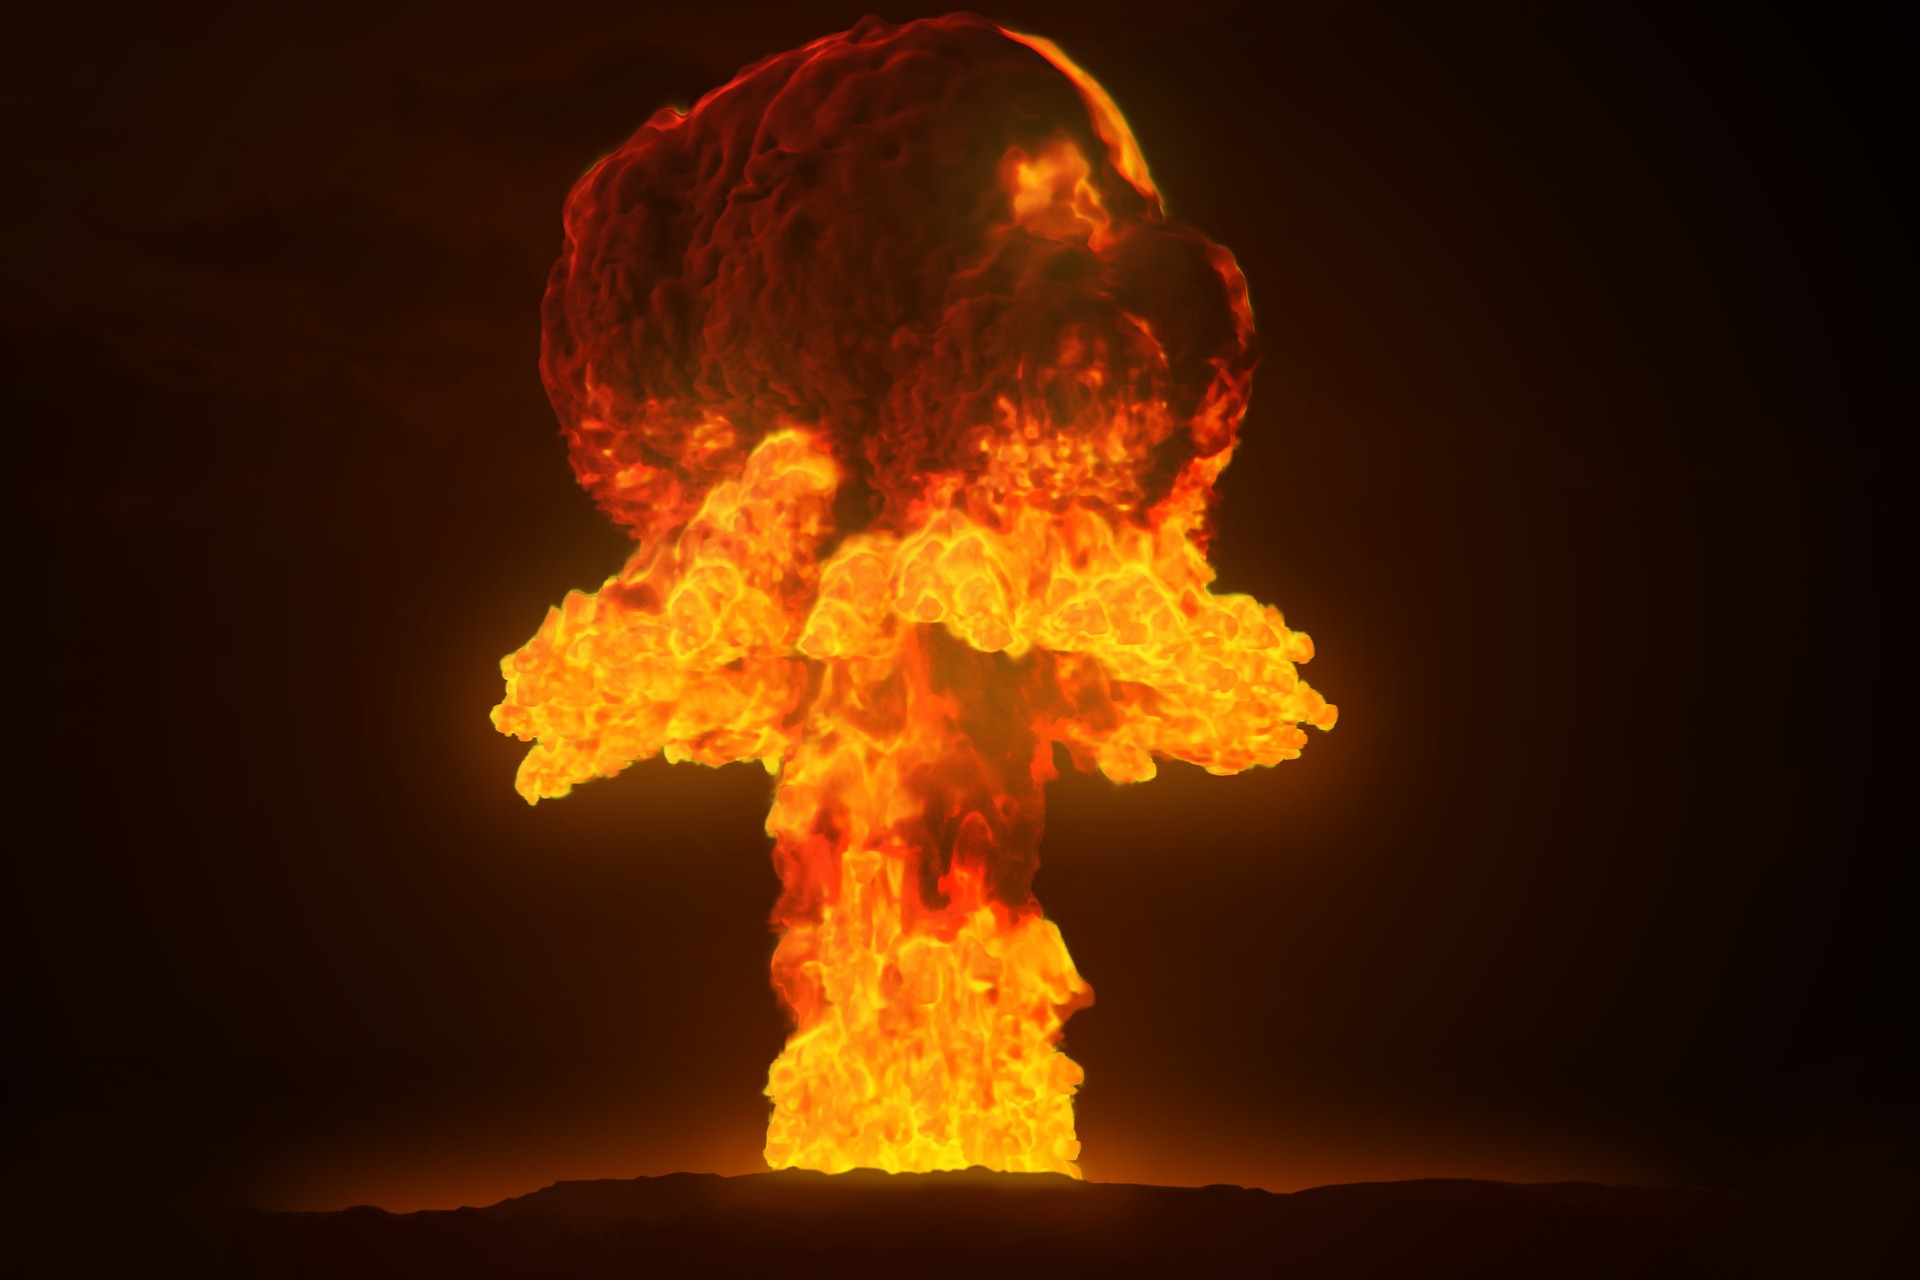 That one time the US detonated a nuke right over a bunch of soldiers